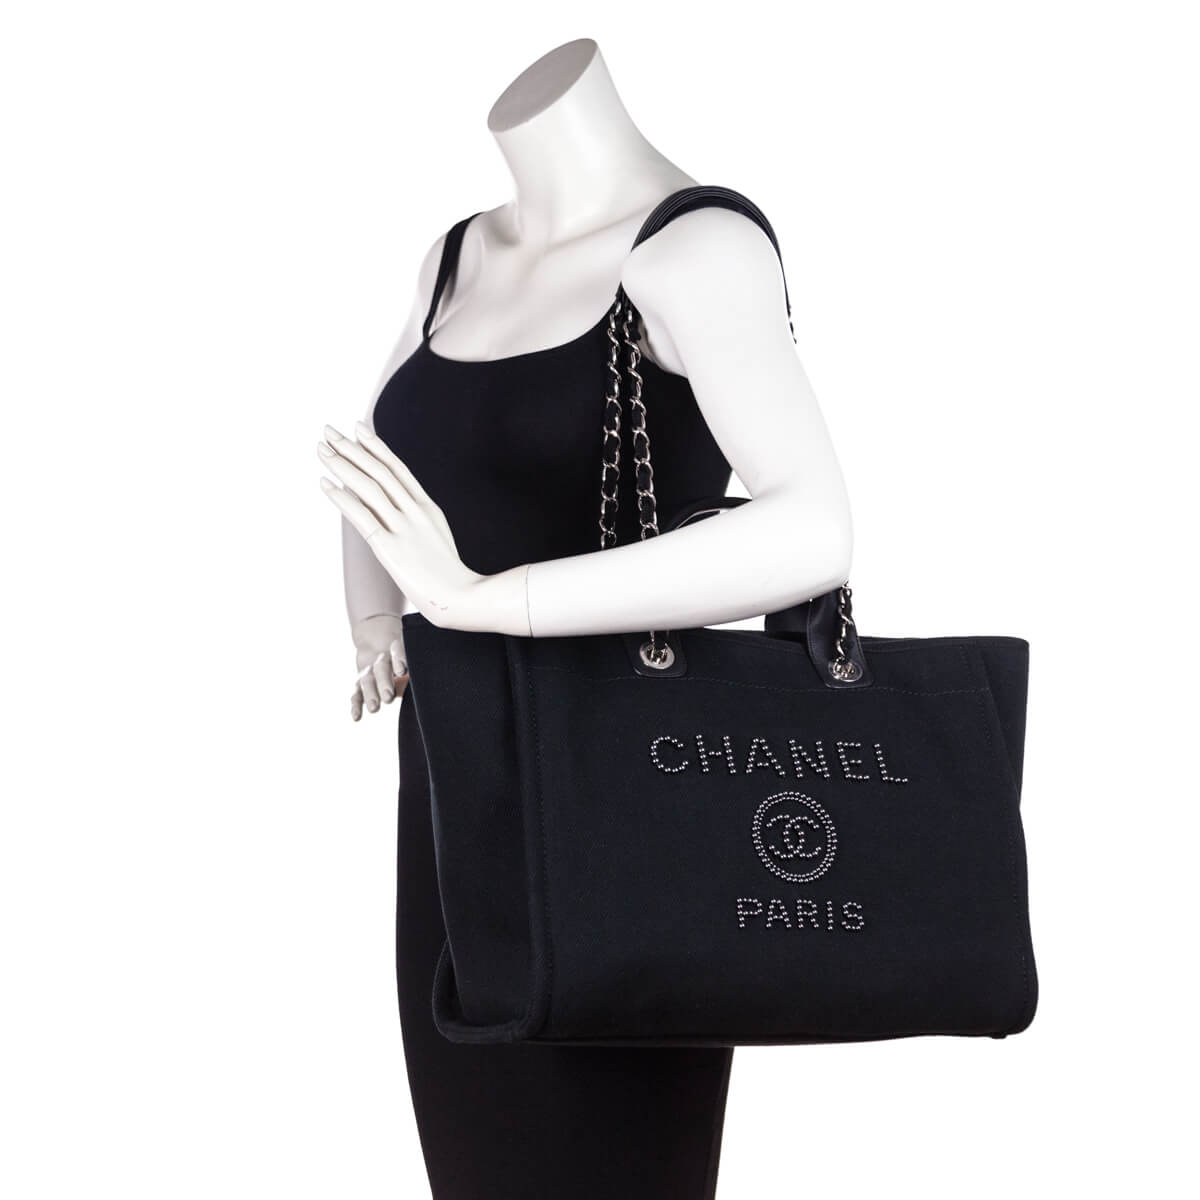 Chanel 2020 Large Deauville Tote - Black Totes, Handbags - CHA902955